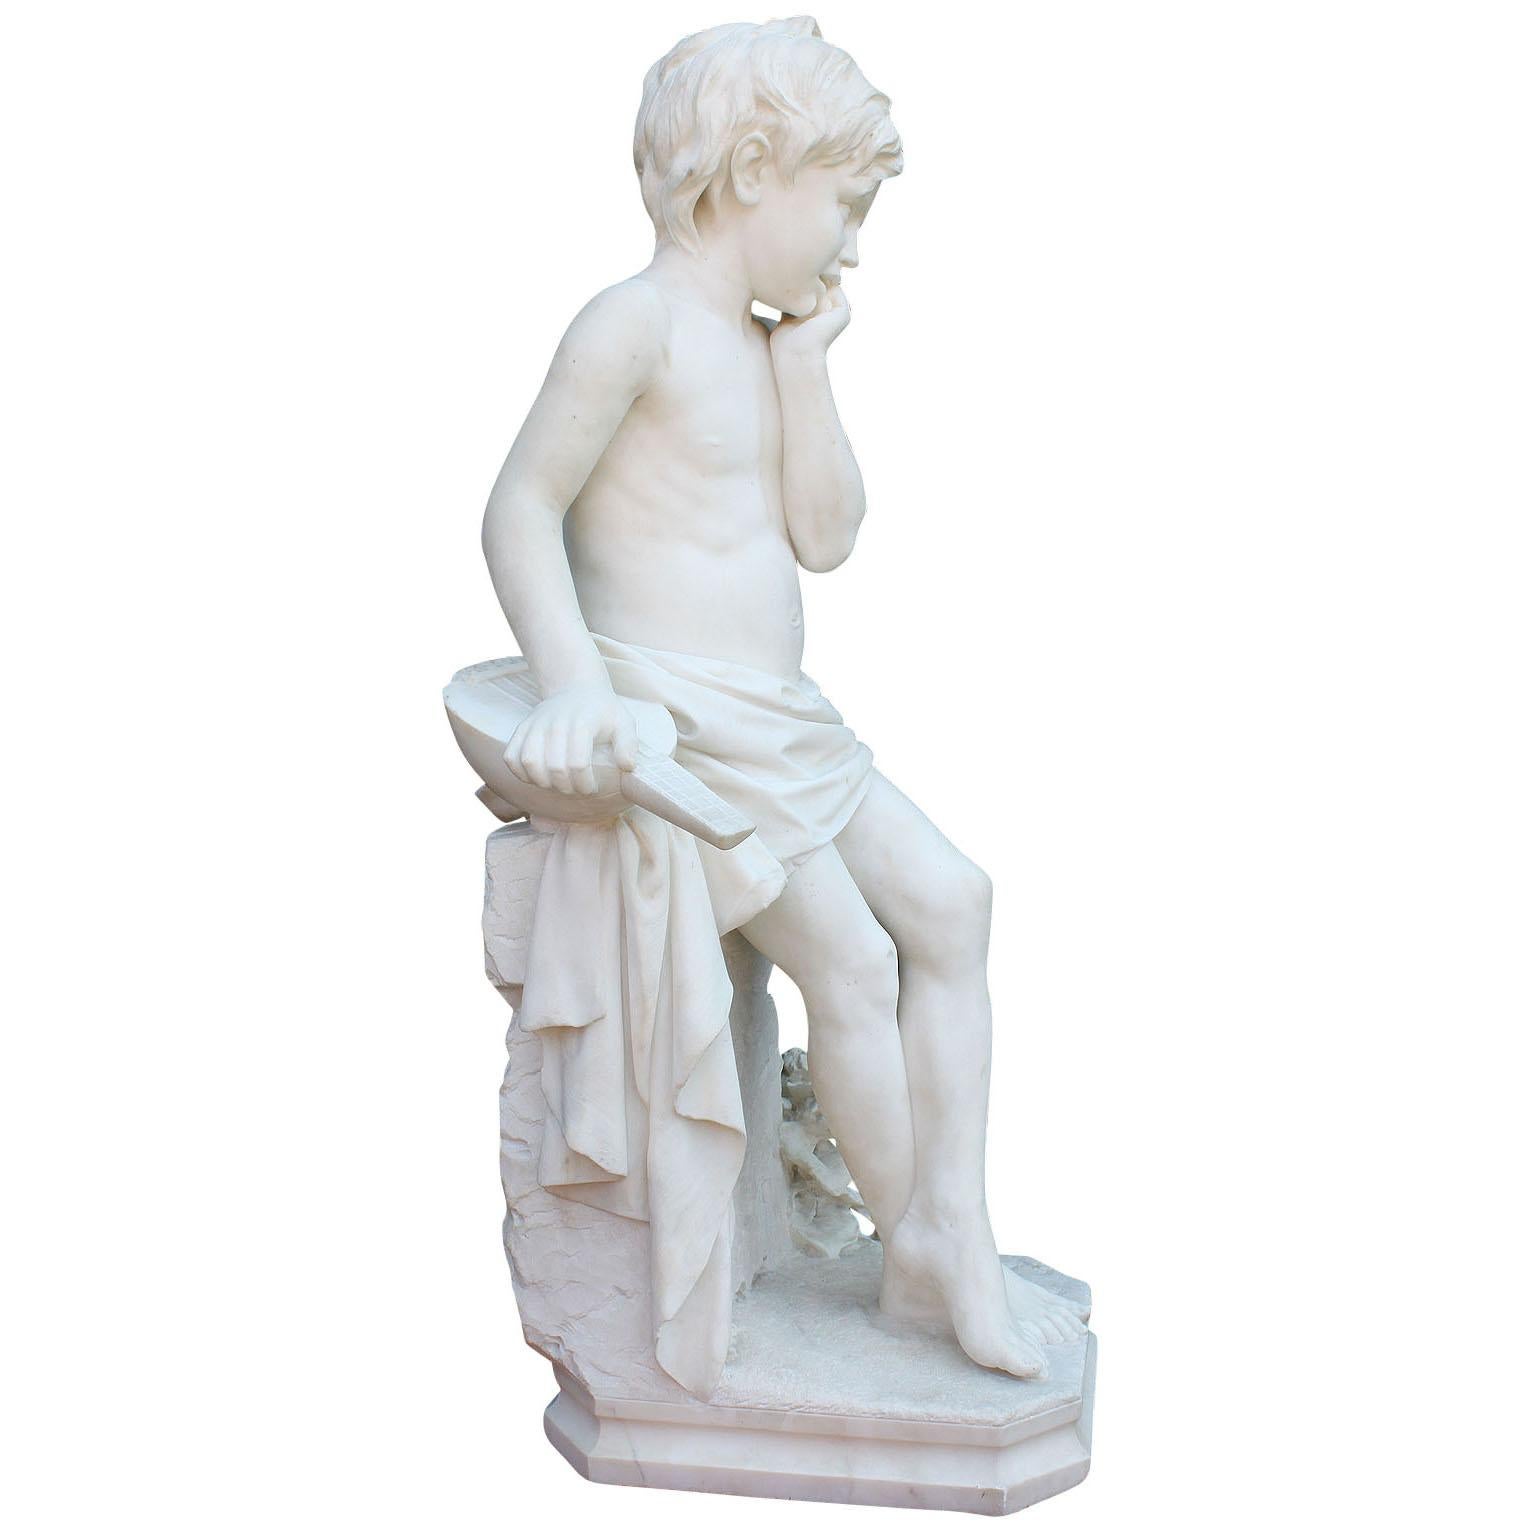 An Italian 19th century carved Carrara marble figure of a standing young boy with a mandolin. The standing figure of a young boy with crossed legs, semi-naked with a blanket around his waist, leaning on a rocky outcrop with wild plants at the base